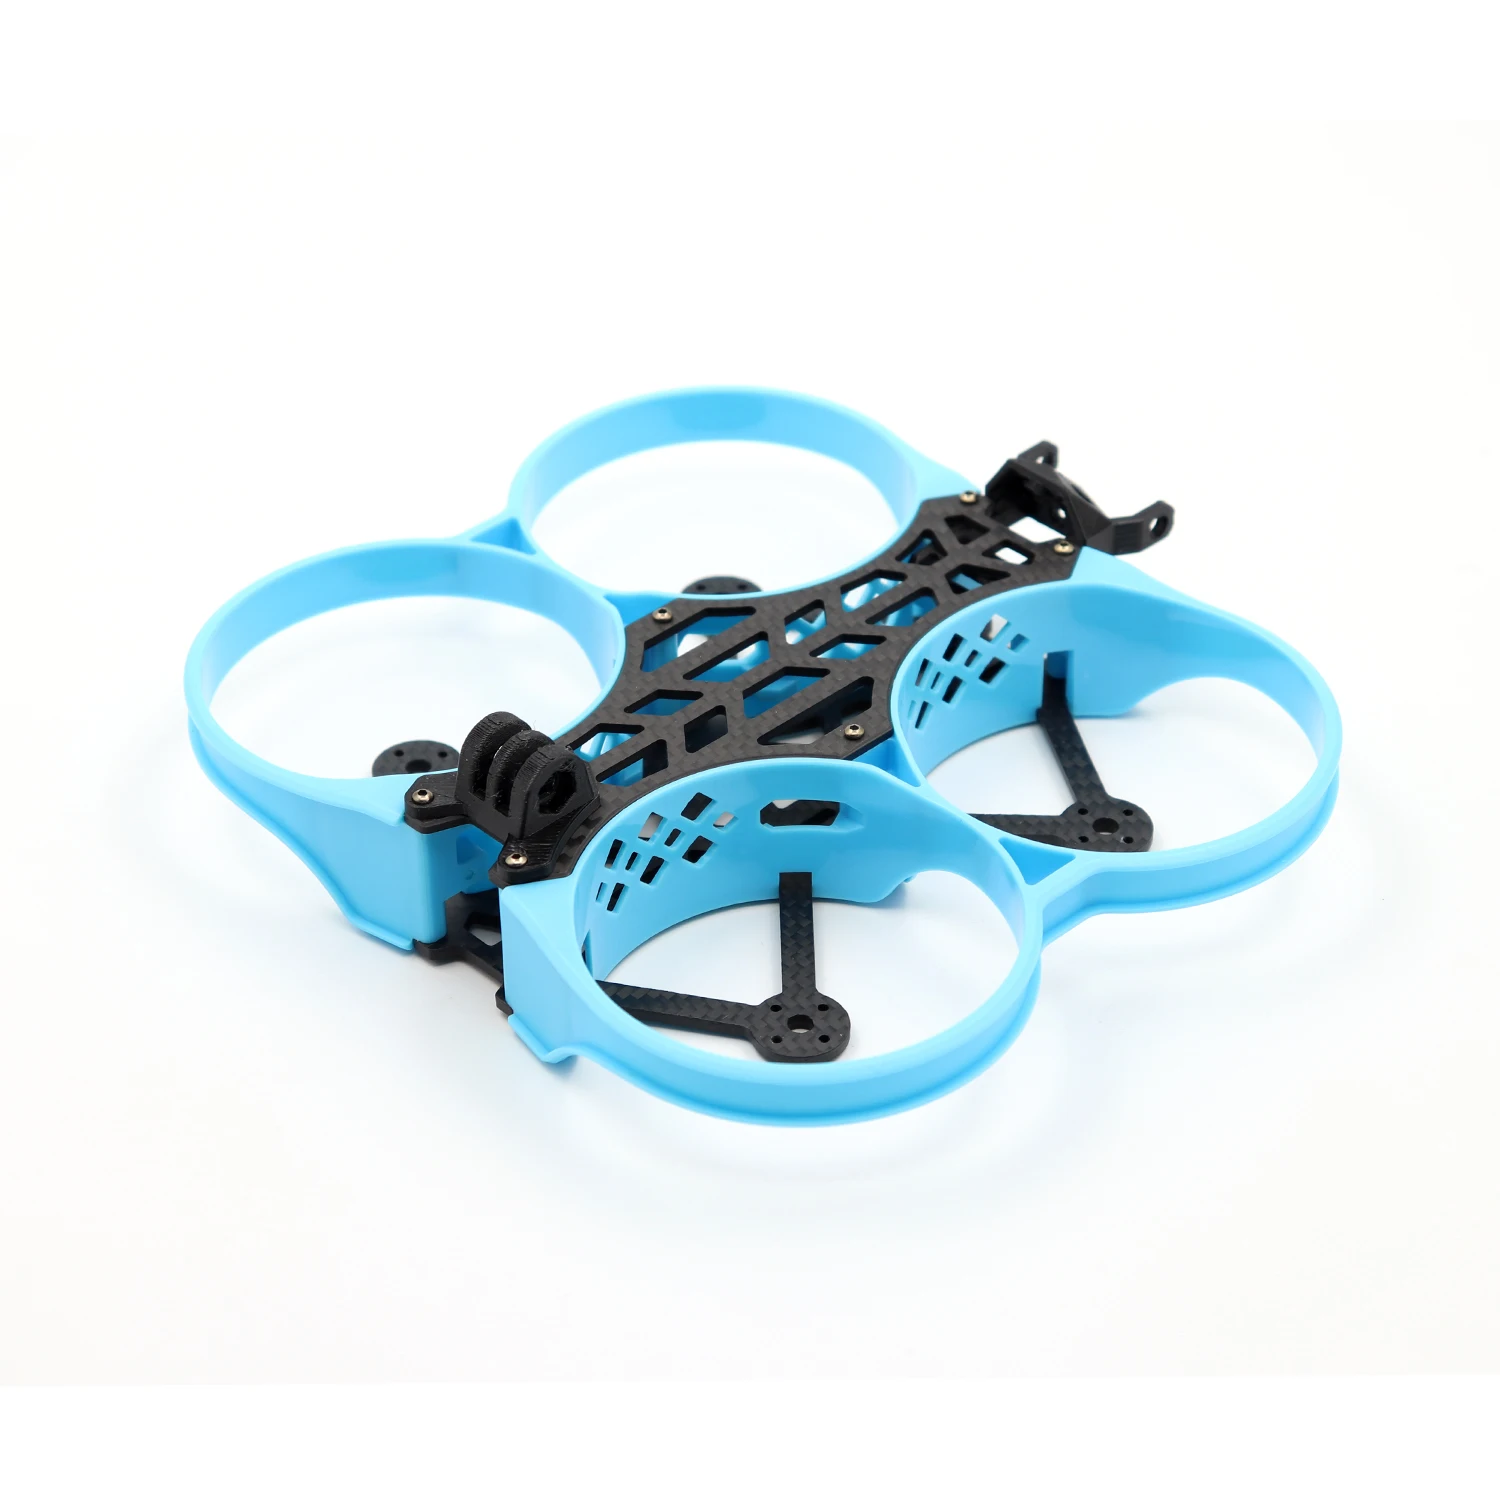 

Reptile CLOUD 149 V2 RC FPV Racing Drone 133mm Carbon Fiber Frame Kit Inductrix 3inch Propeller Protective Cover Type C LED BB